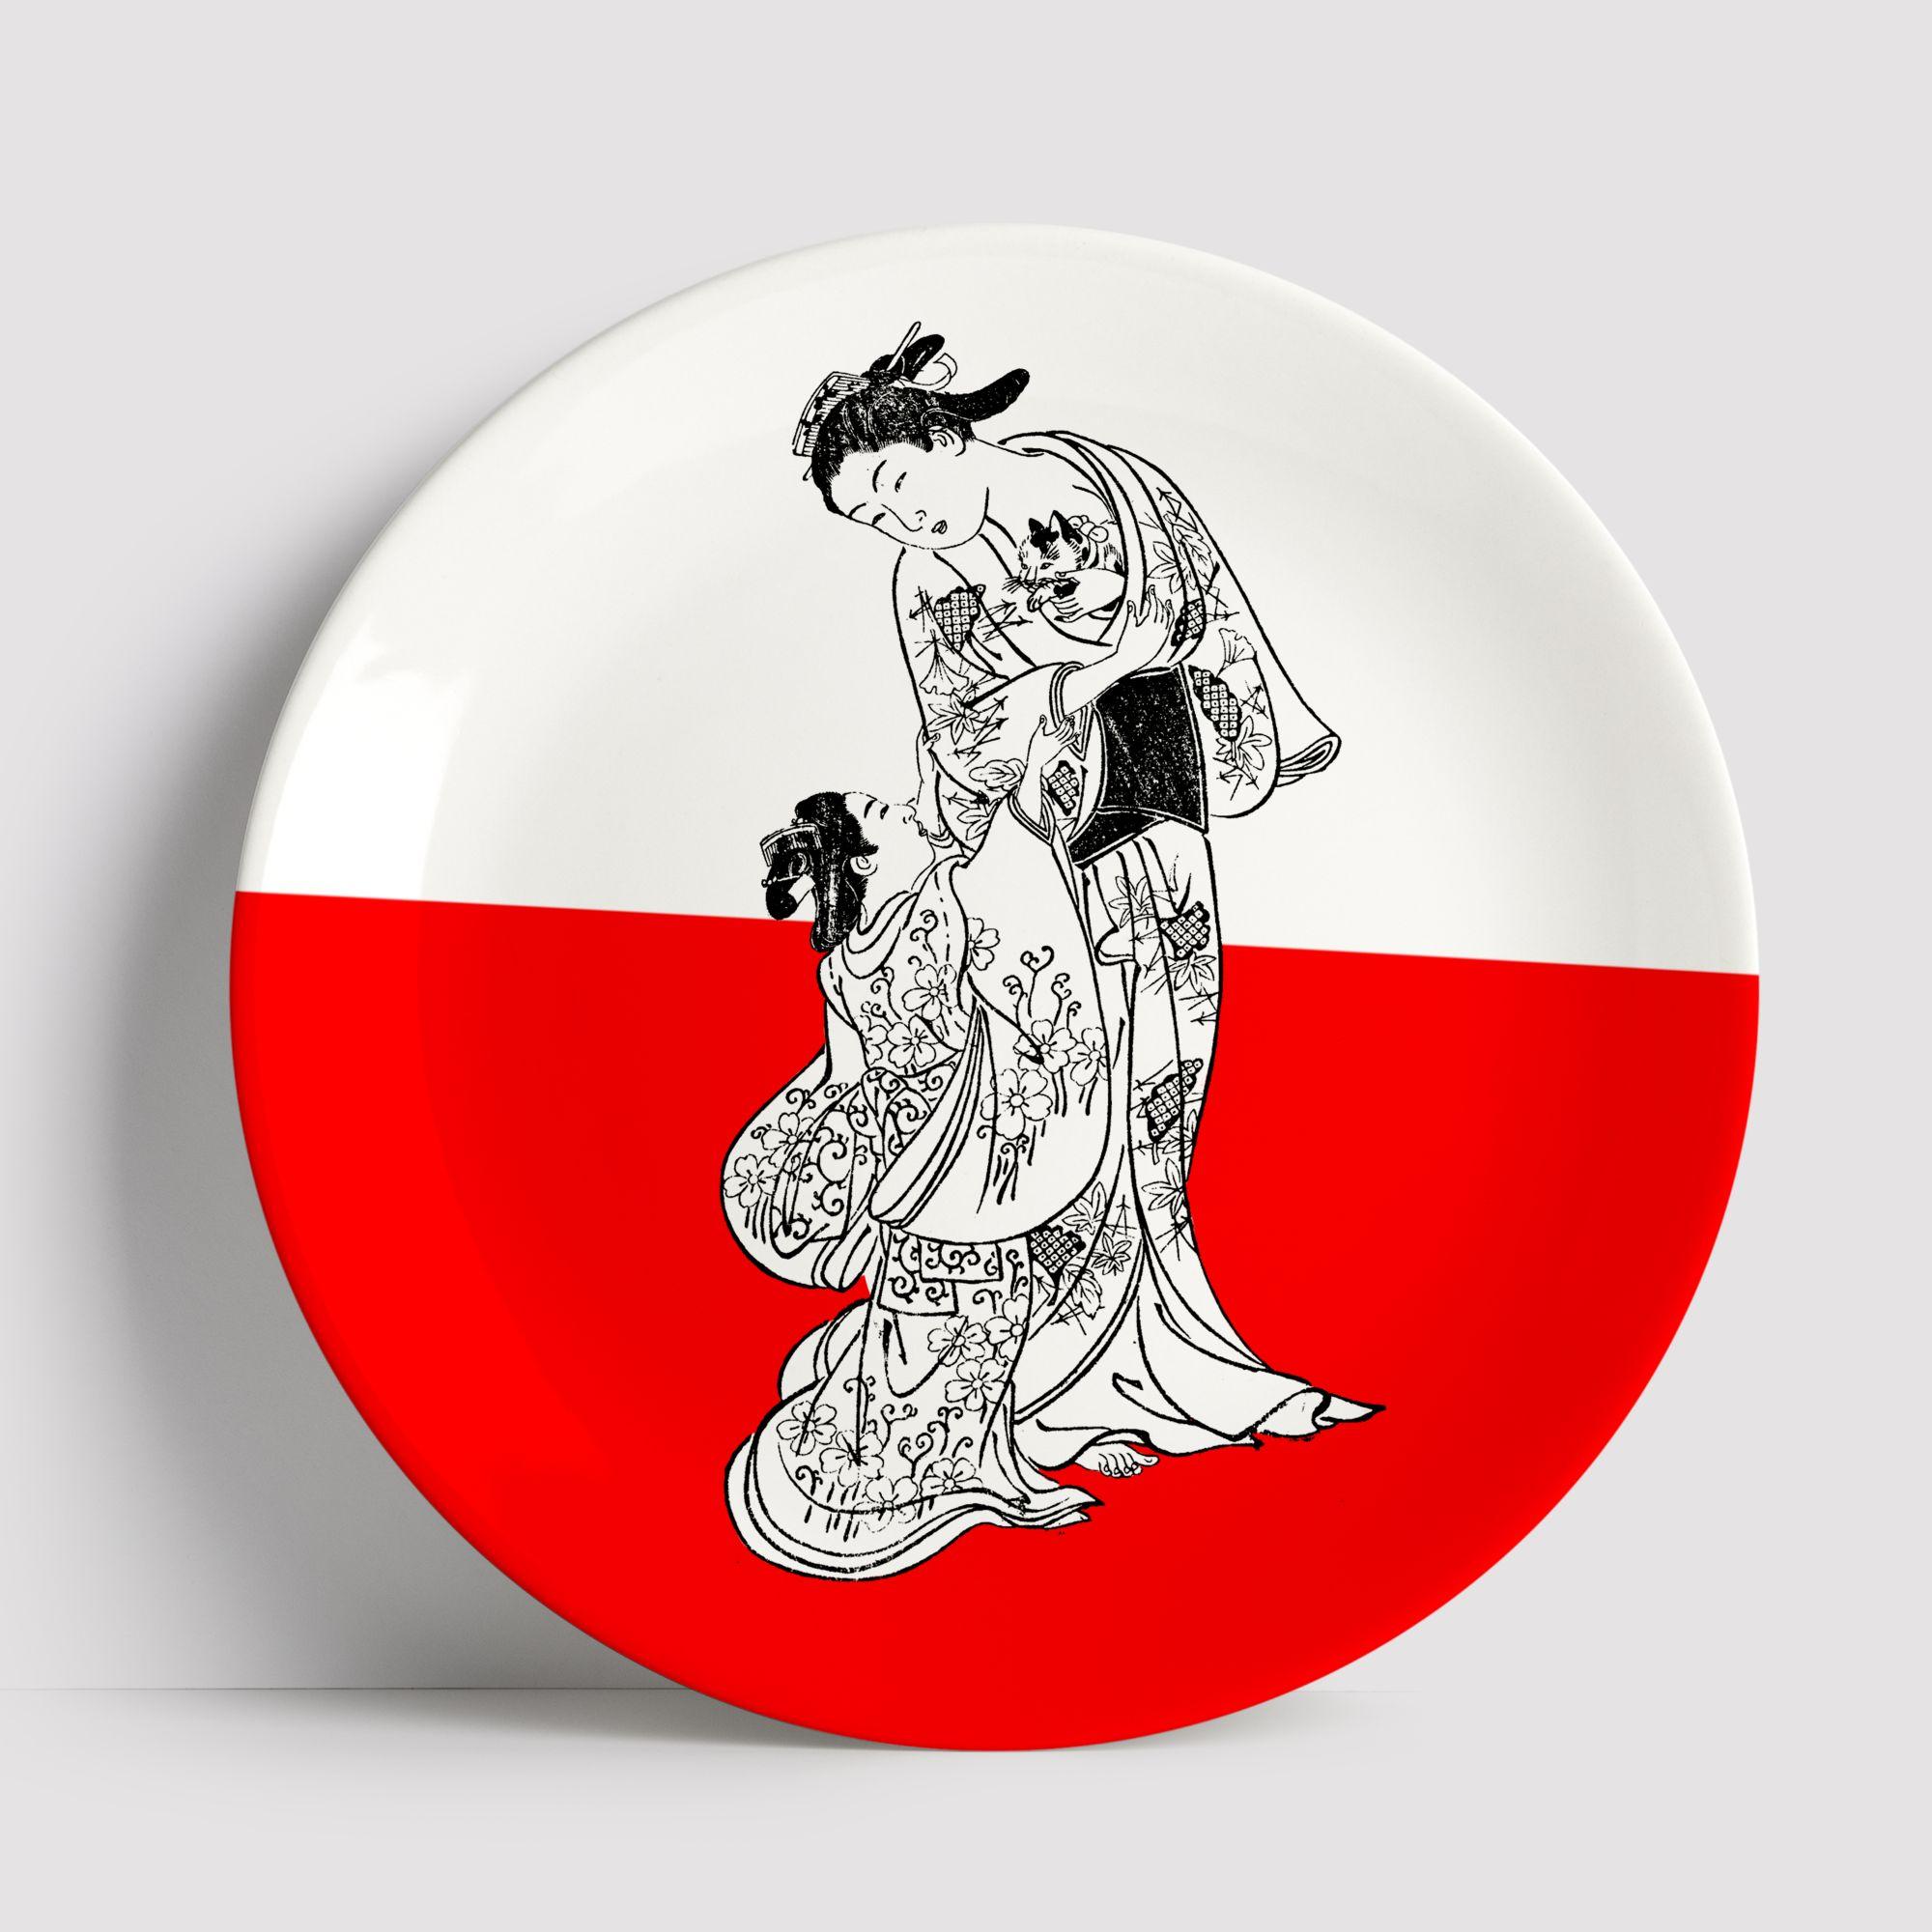 Beautiful Japanese Family porcelain dinner plate by Plus Lab will make an elegant statement with sophisticated Art de la table for every occasion
Made in Italy

Upon request available in a set of three or six plates.